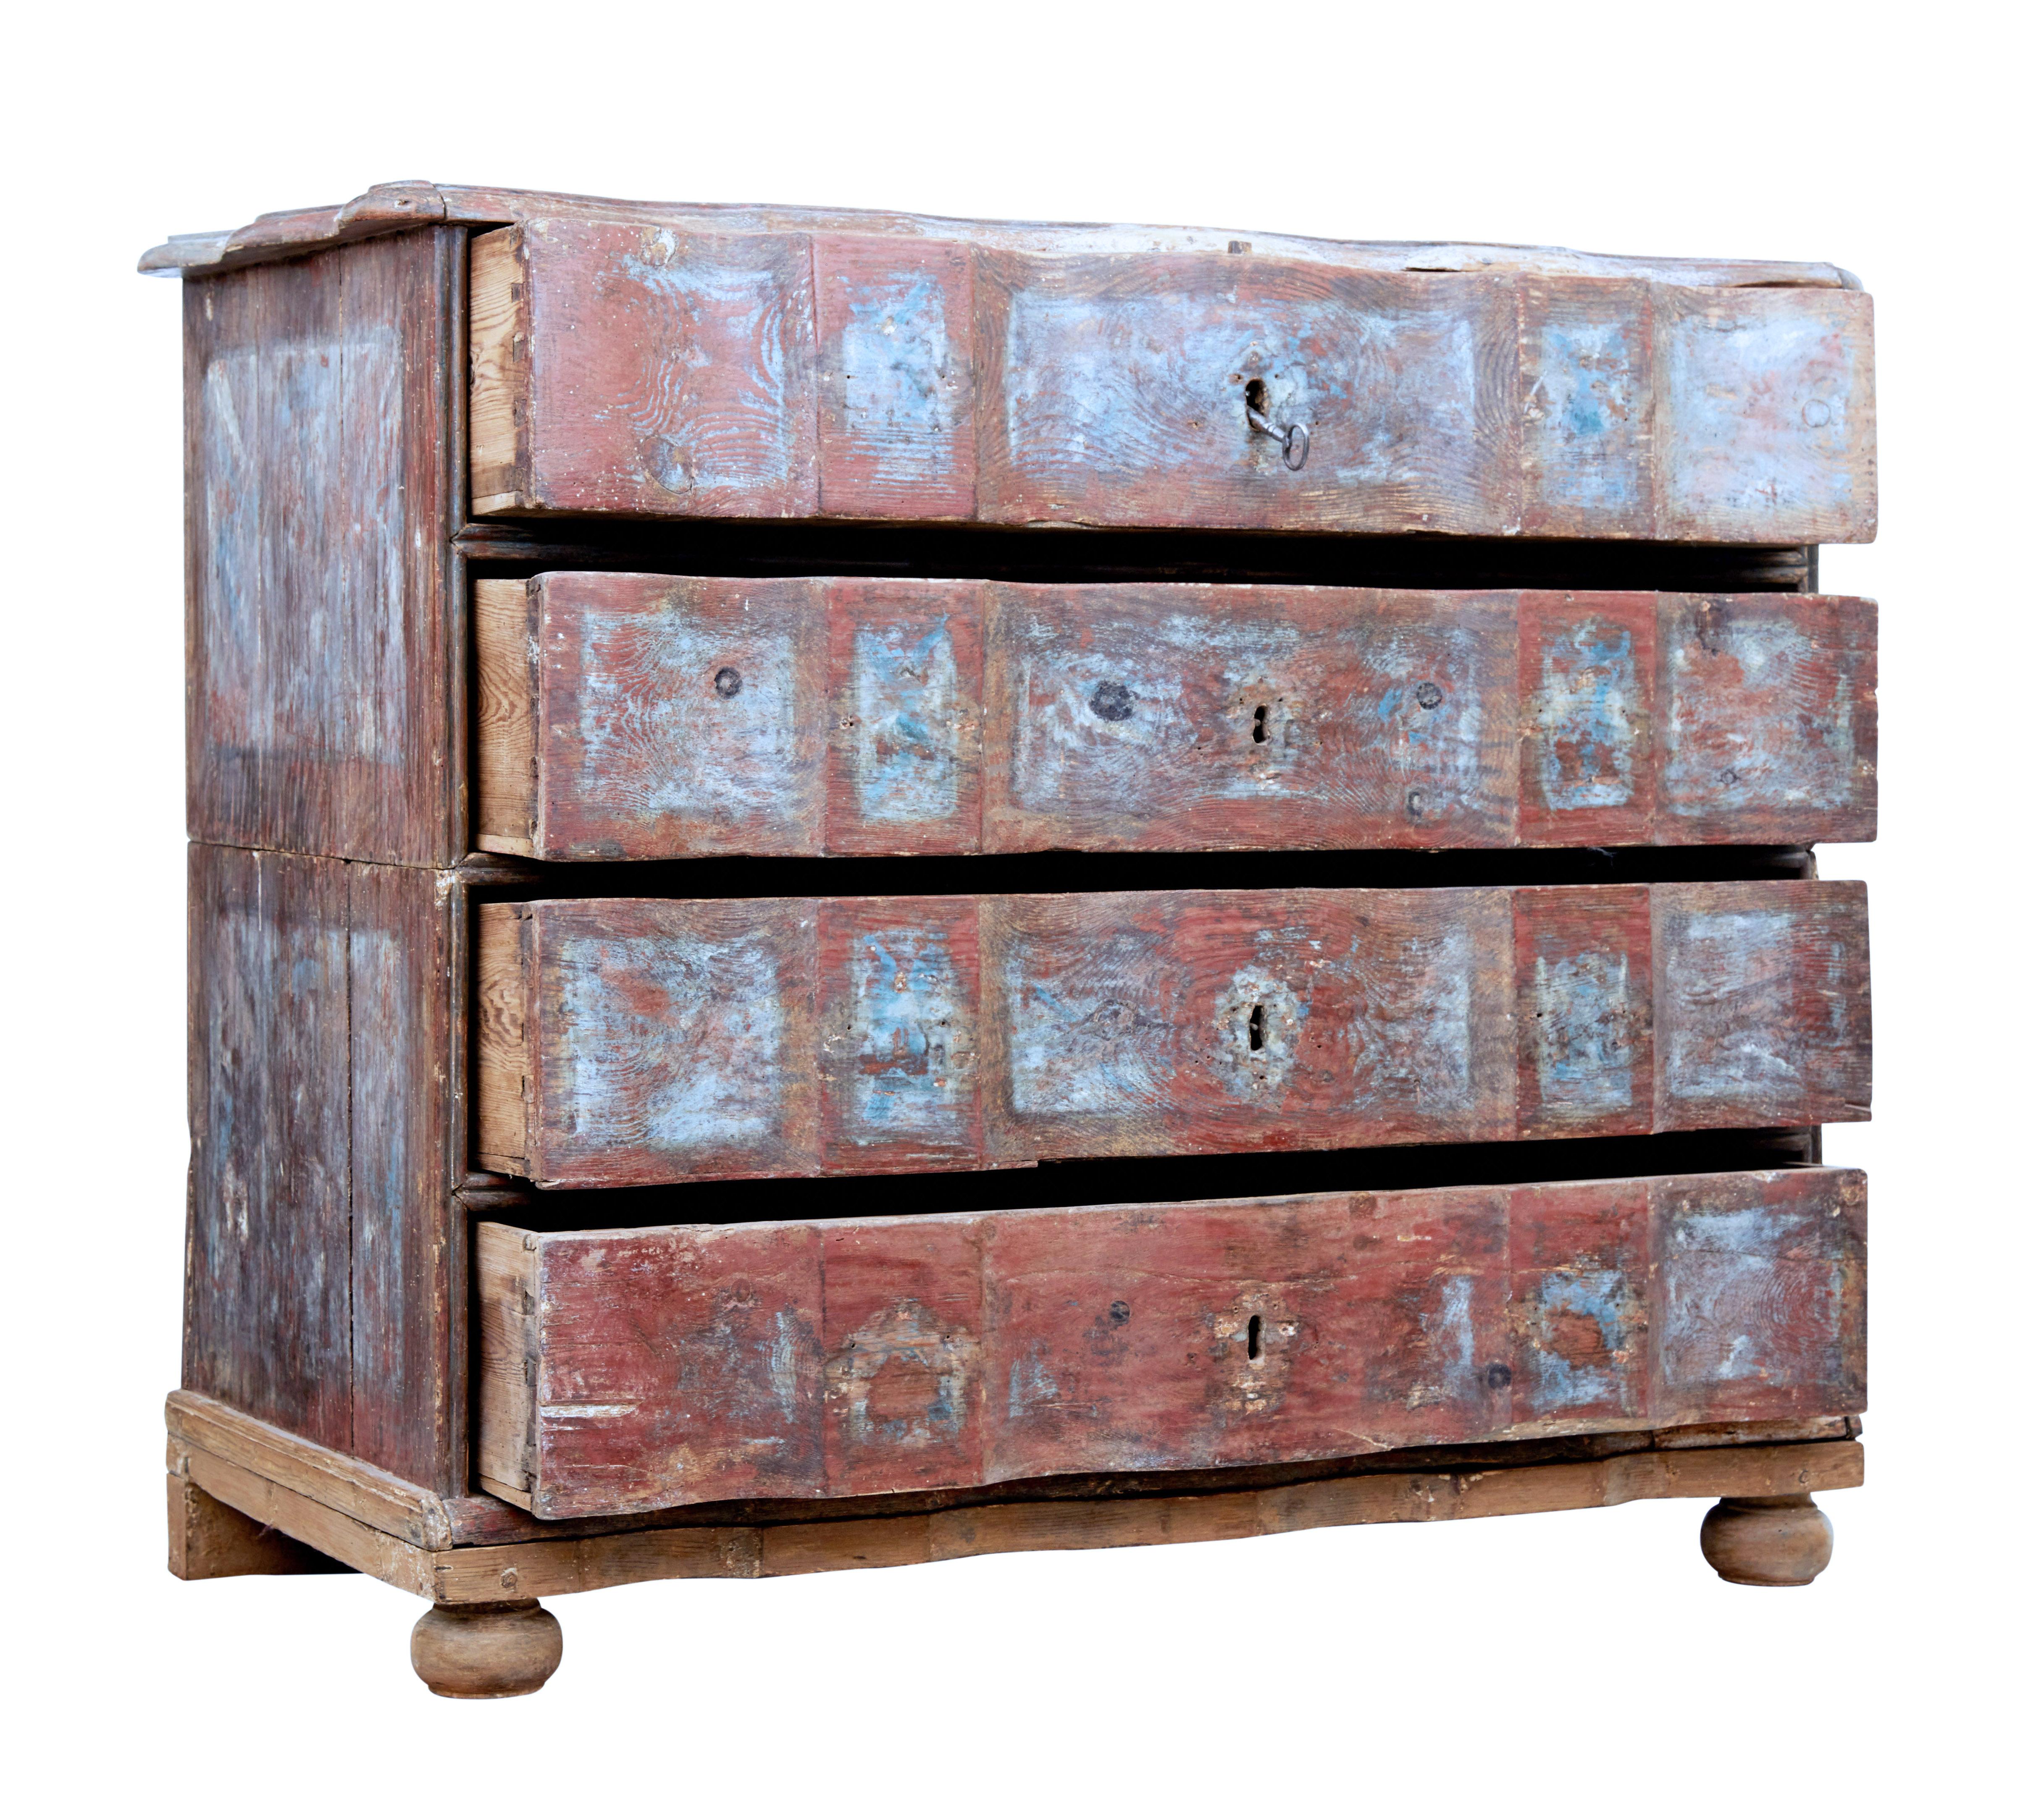 Baroque Mid-18th Century Danish Pine Painted Chest of Drawers